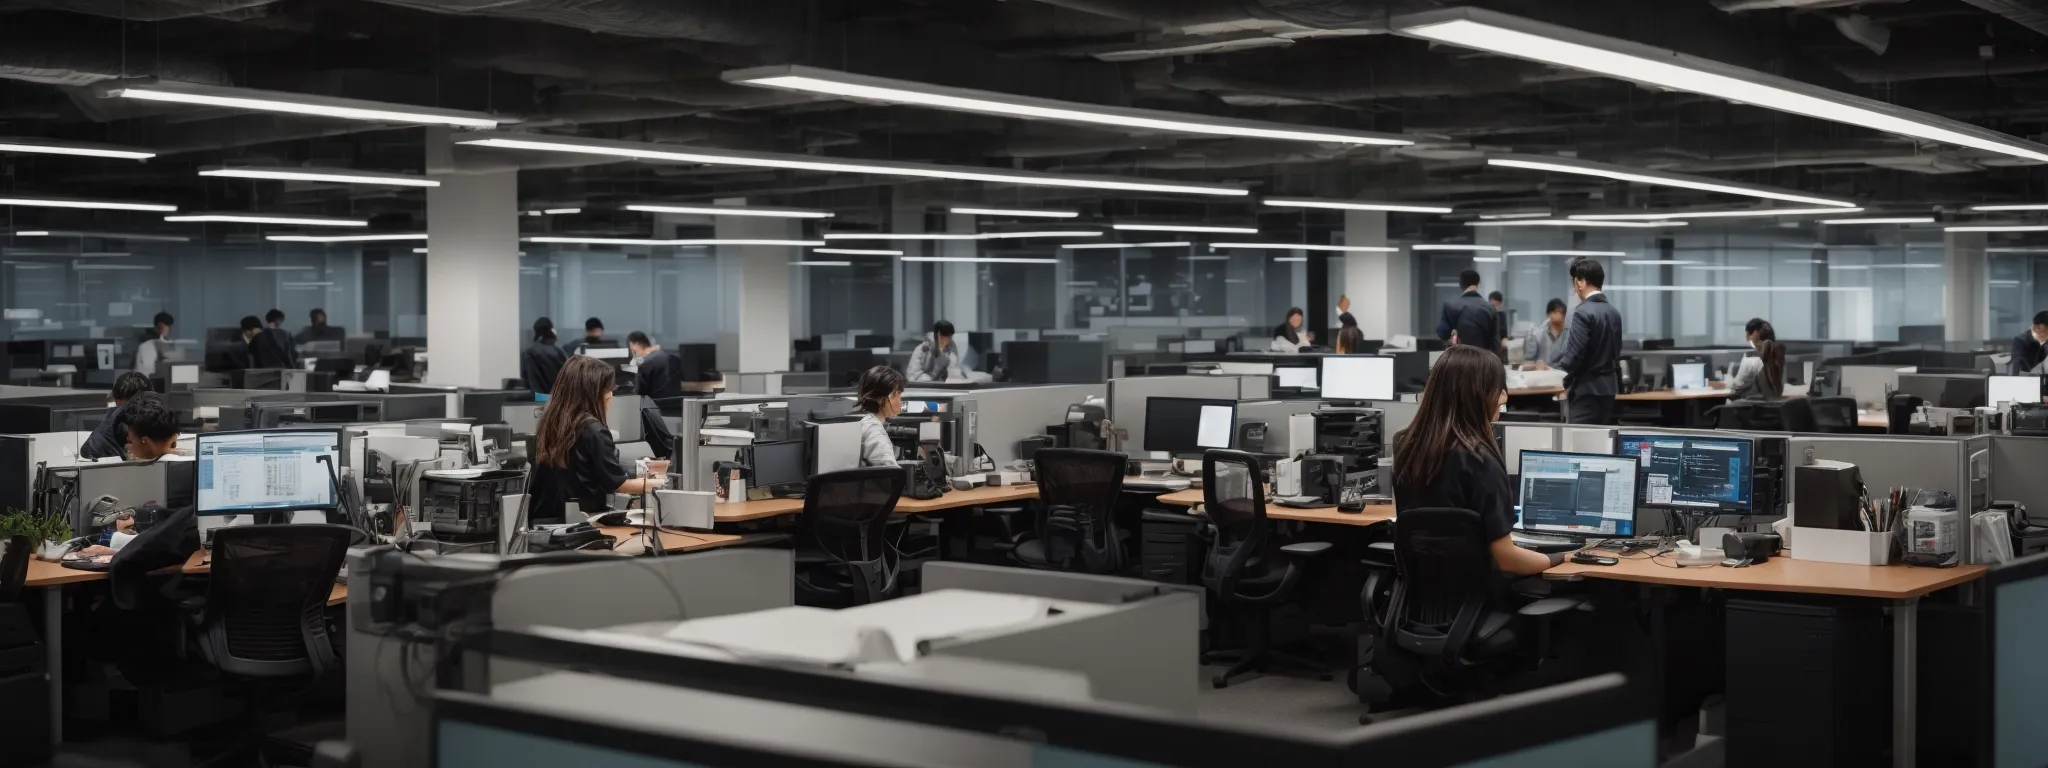 a busy office space with multiple people working on computers, highlighting collaboration and technology in a modern workplace.